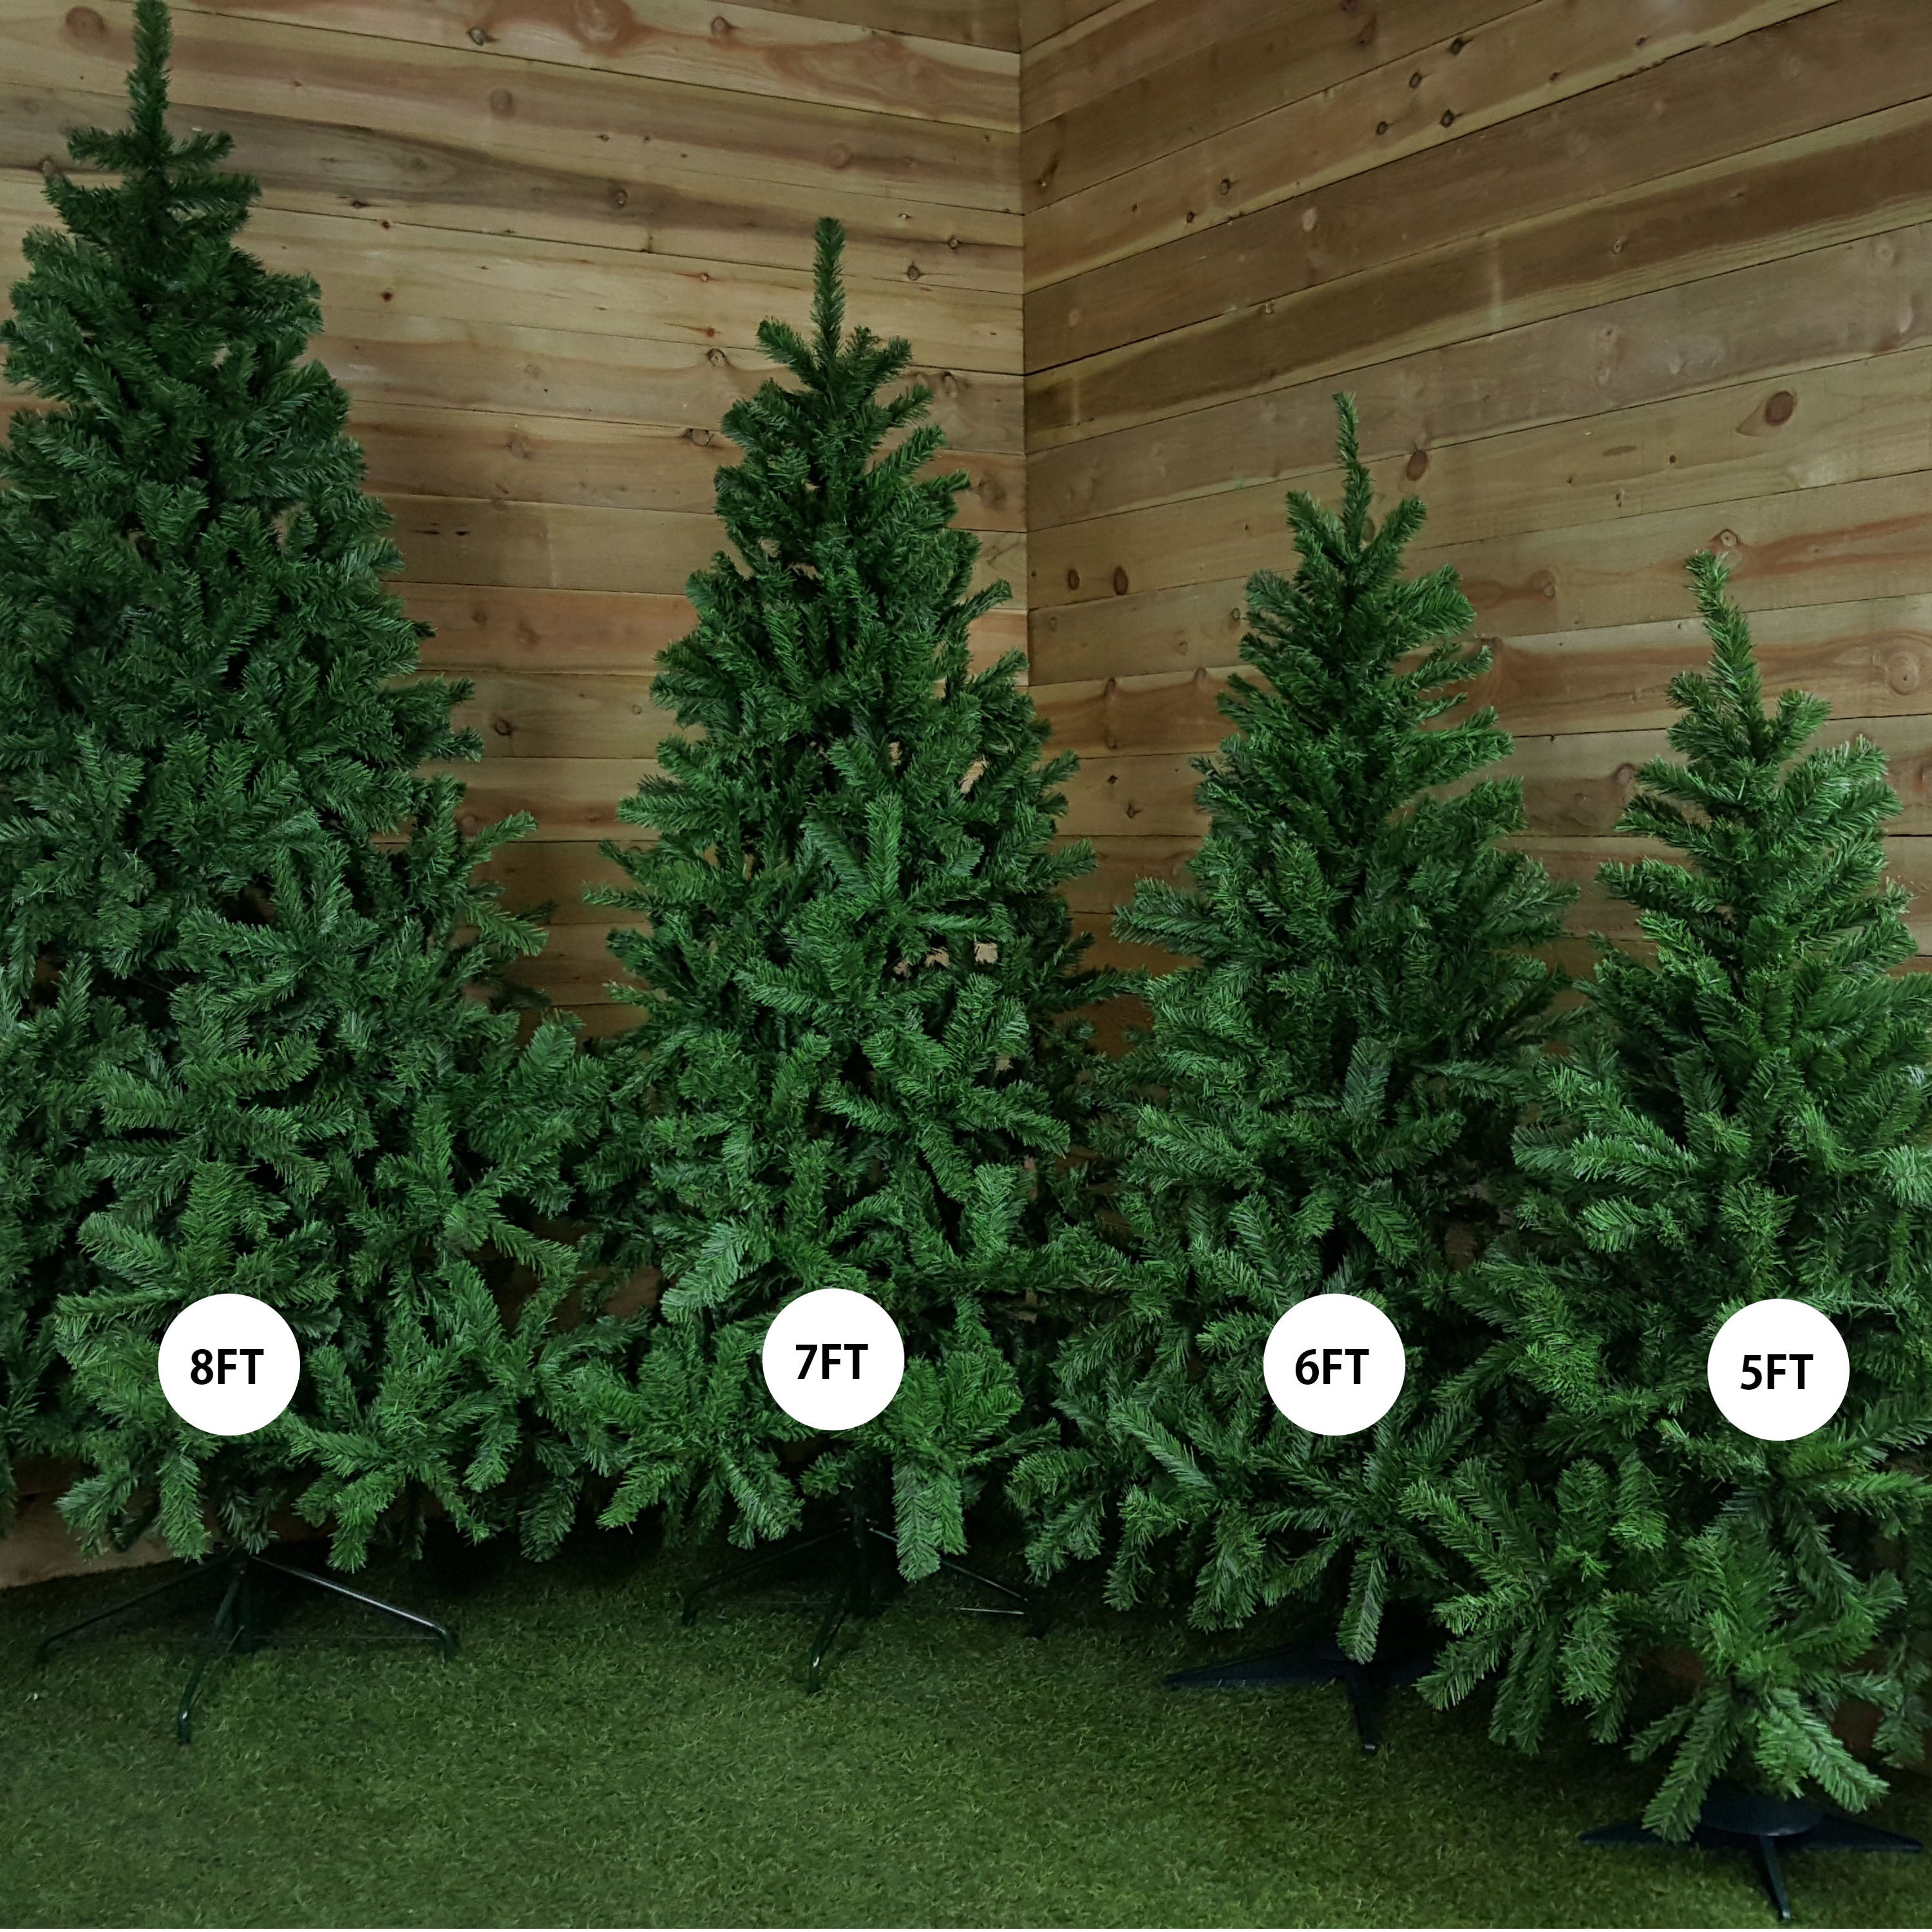 5ft Colorado Spruce Christmas Tree in Green with 337 tips 86cm Diameter